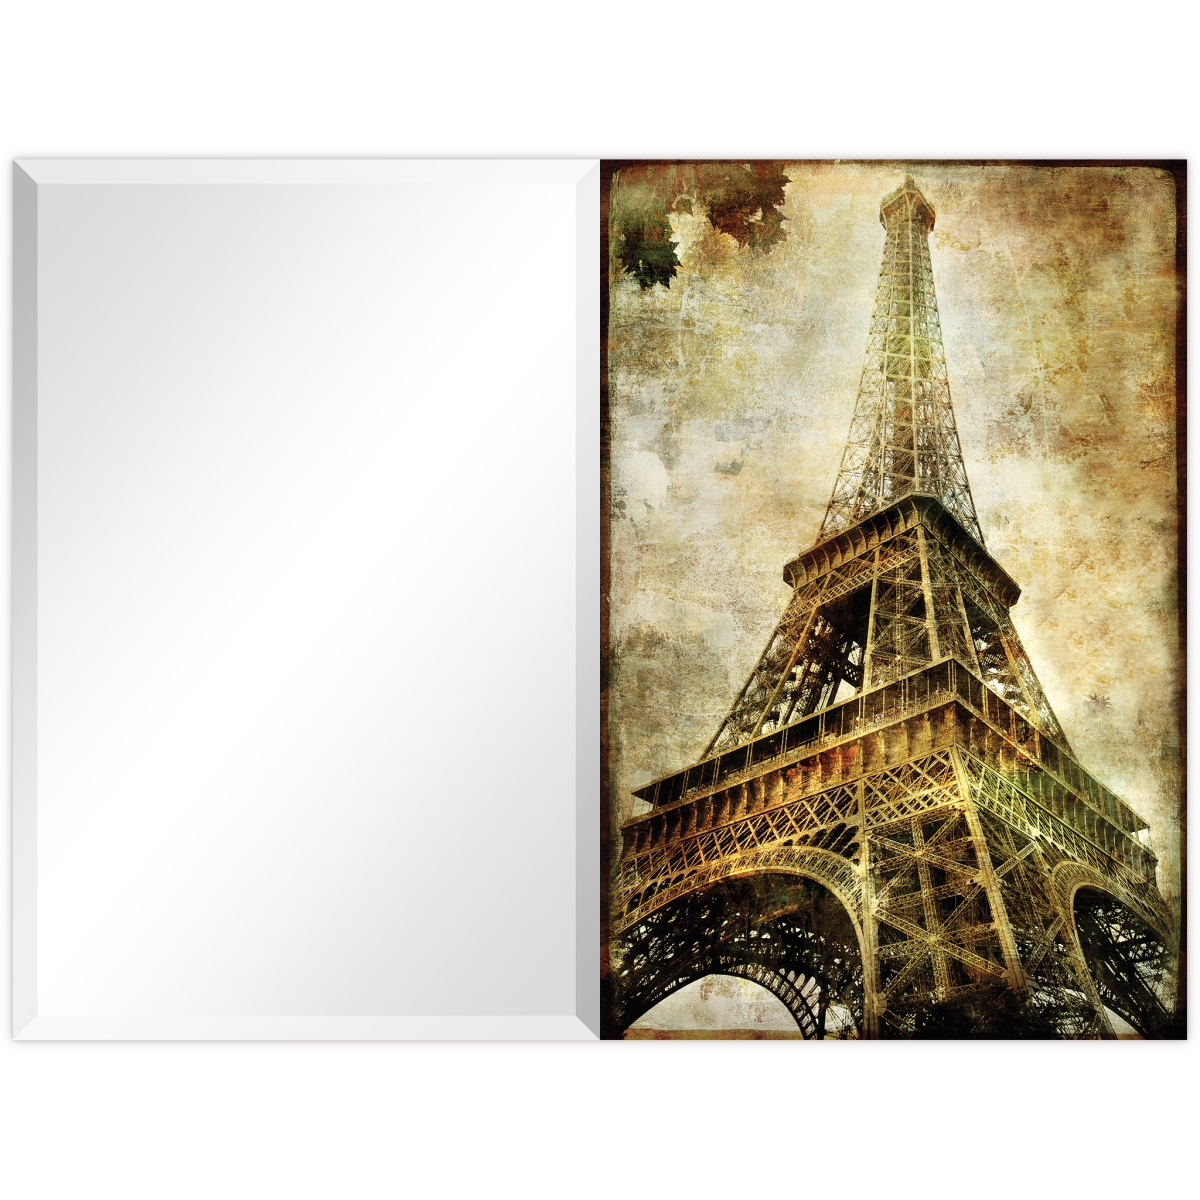 Solid Storage Supplies Eiffel Tower Rectangular Beveled Mirror on Free Floating Printed Tempered Art Glass